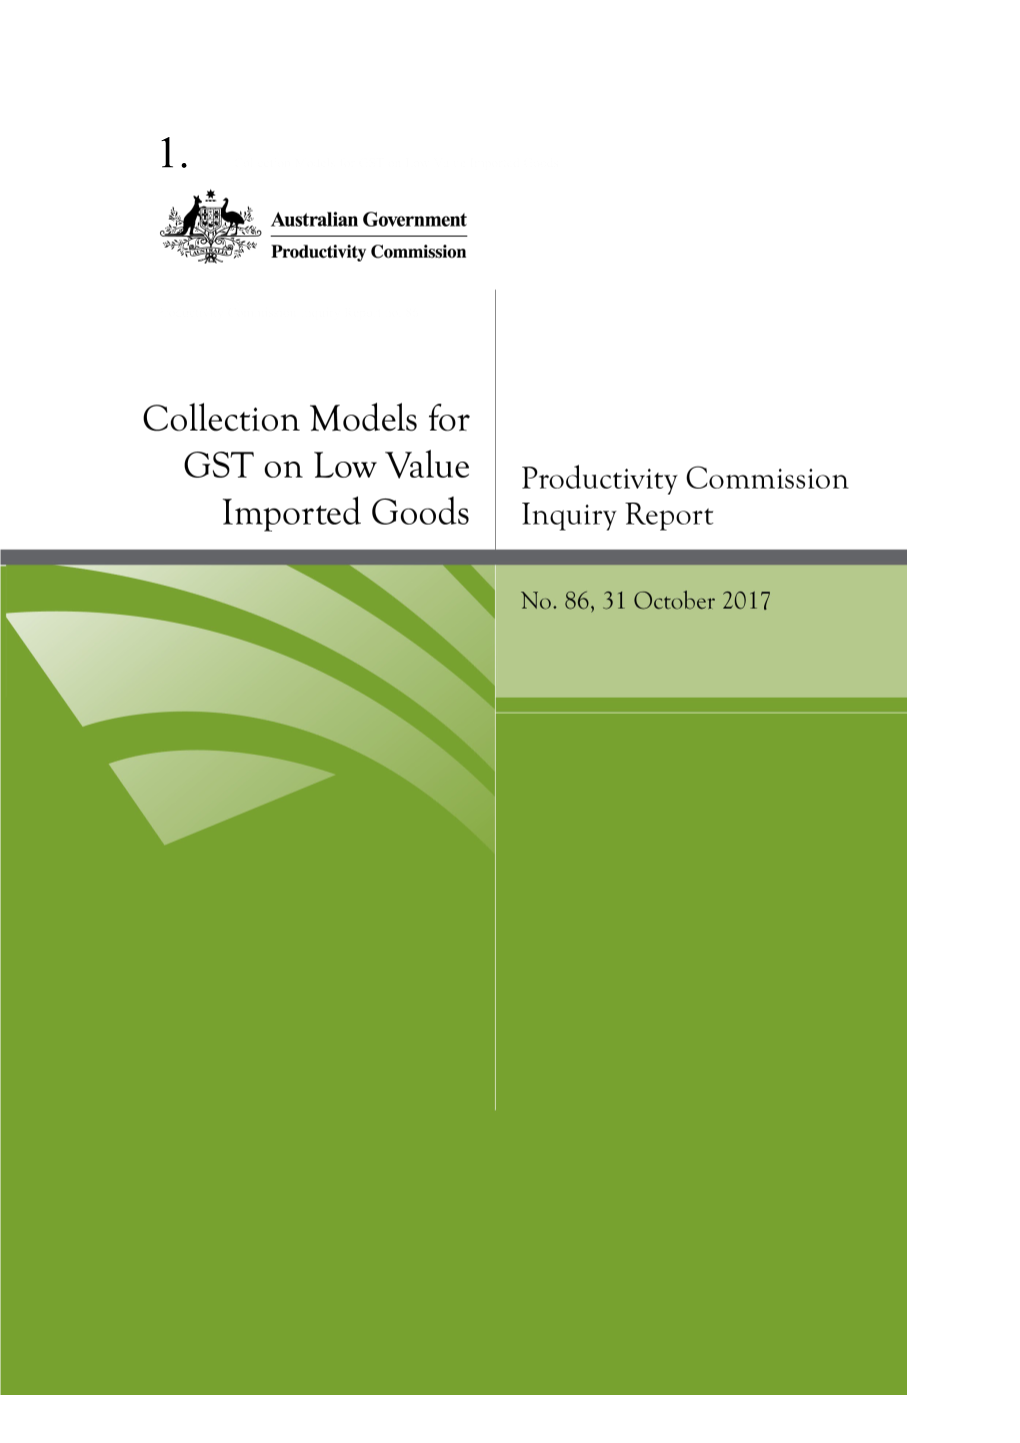 Inquiry Report - Collection Models for GST on Low Value Imported Goods